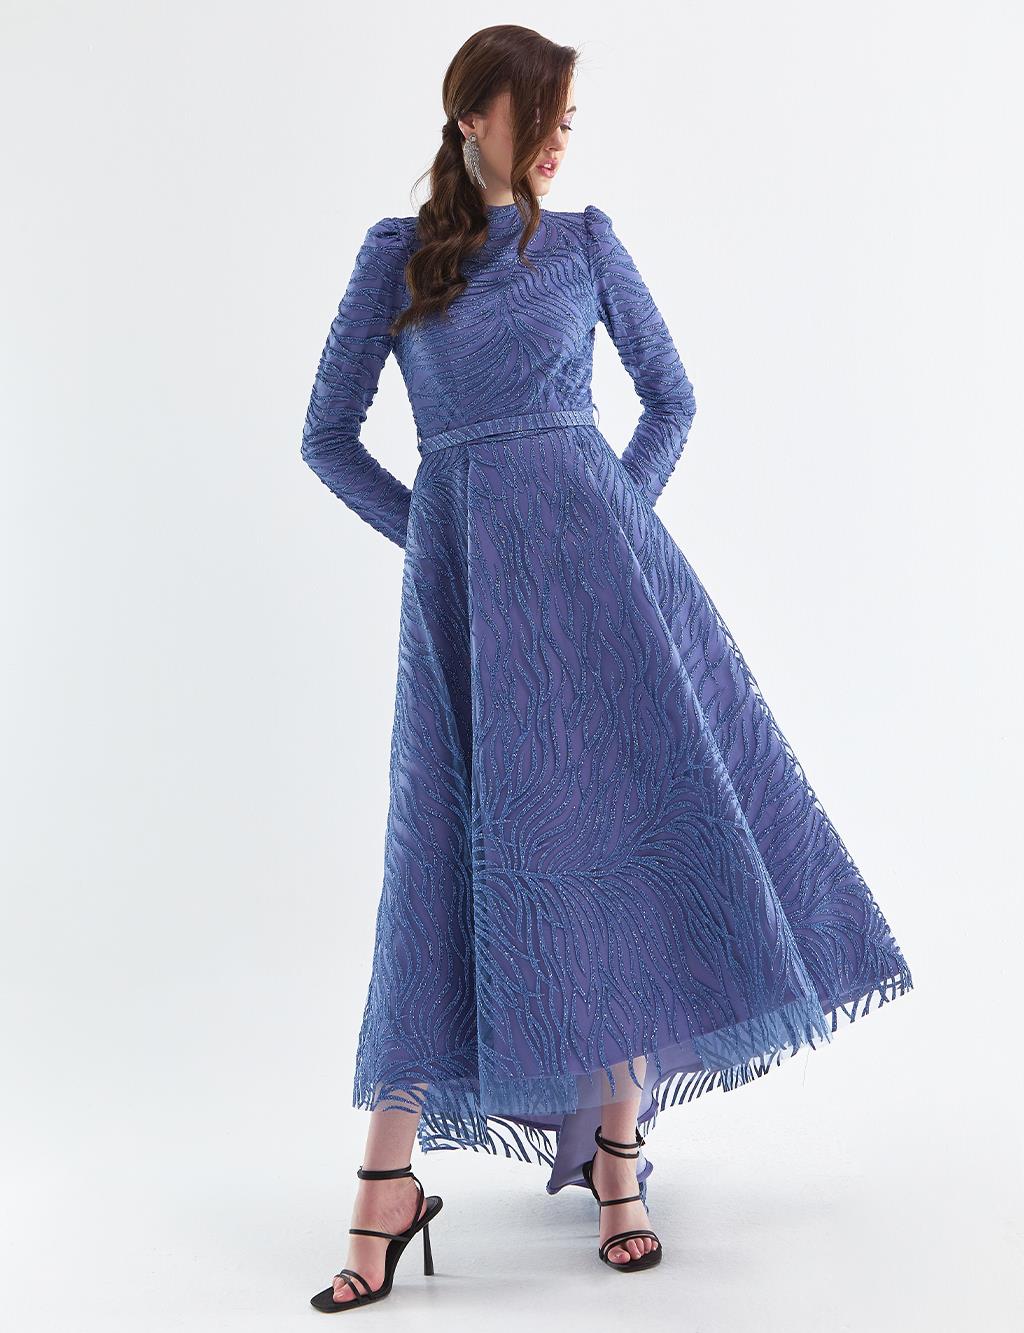 Embroidered Tulle Covered Evening Dress Indigo LA